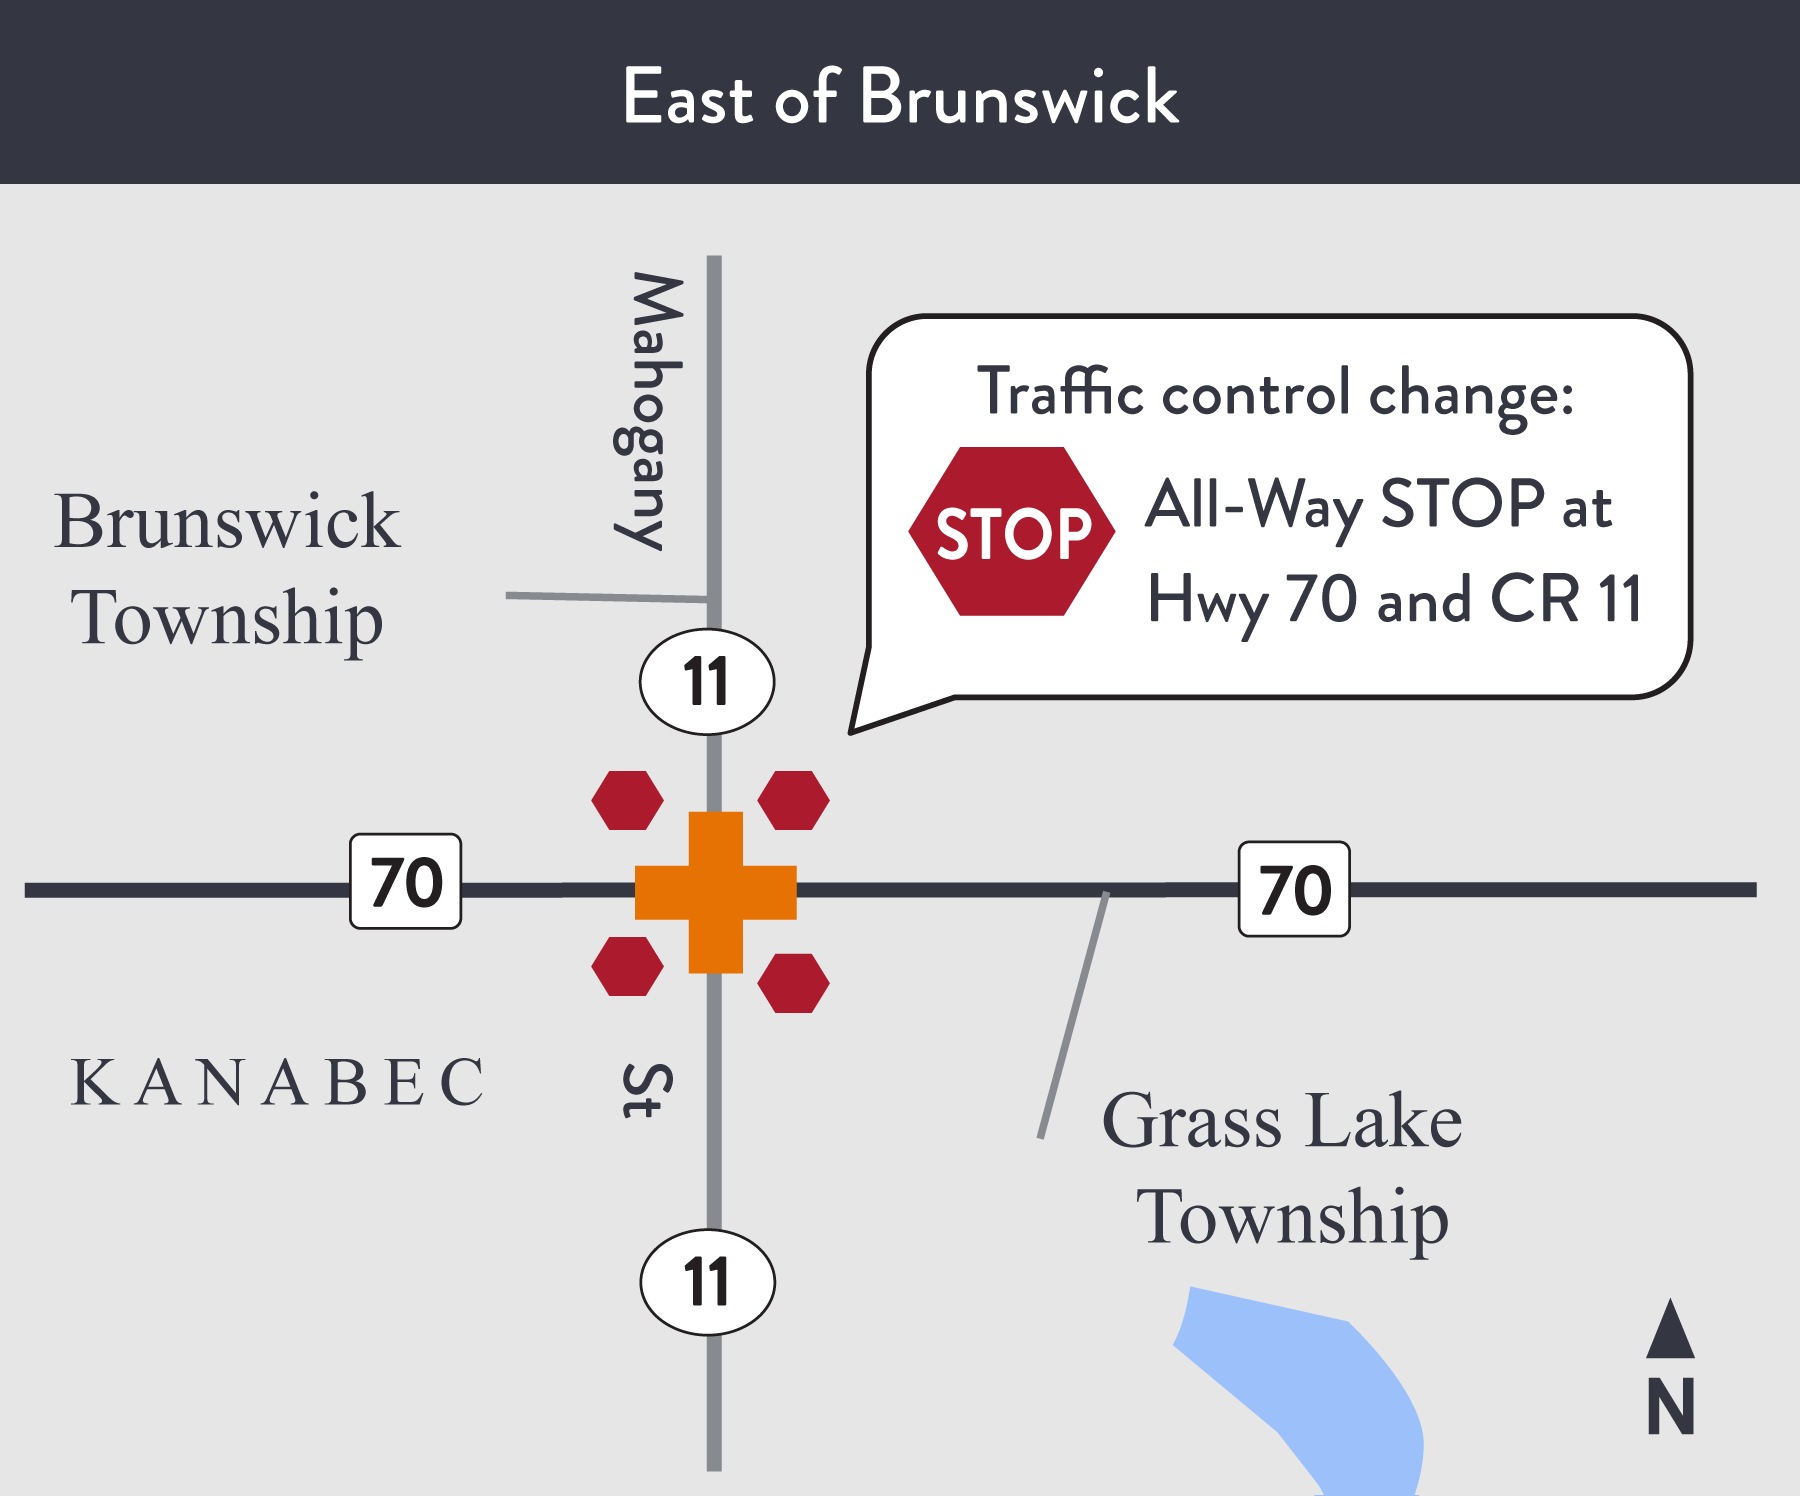 Hwy 70 at Co. Rd. 11 becomes all-way stop